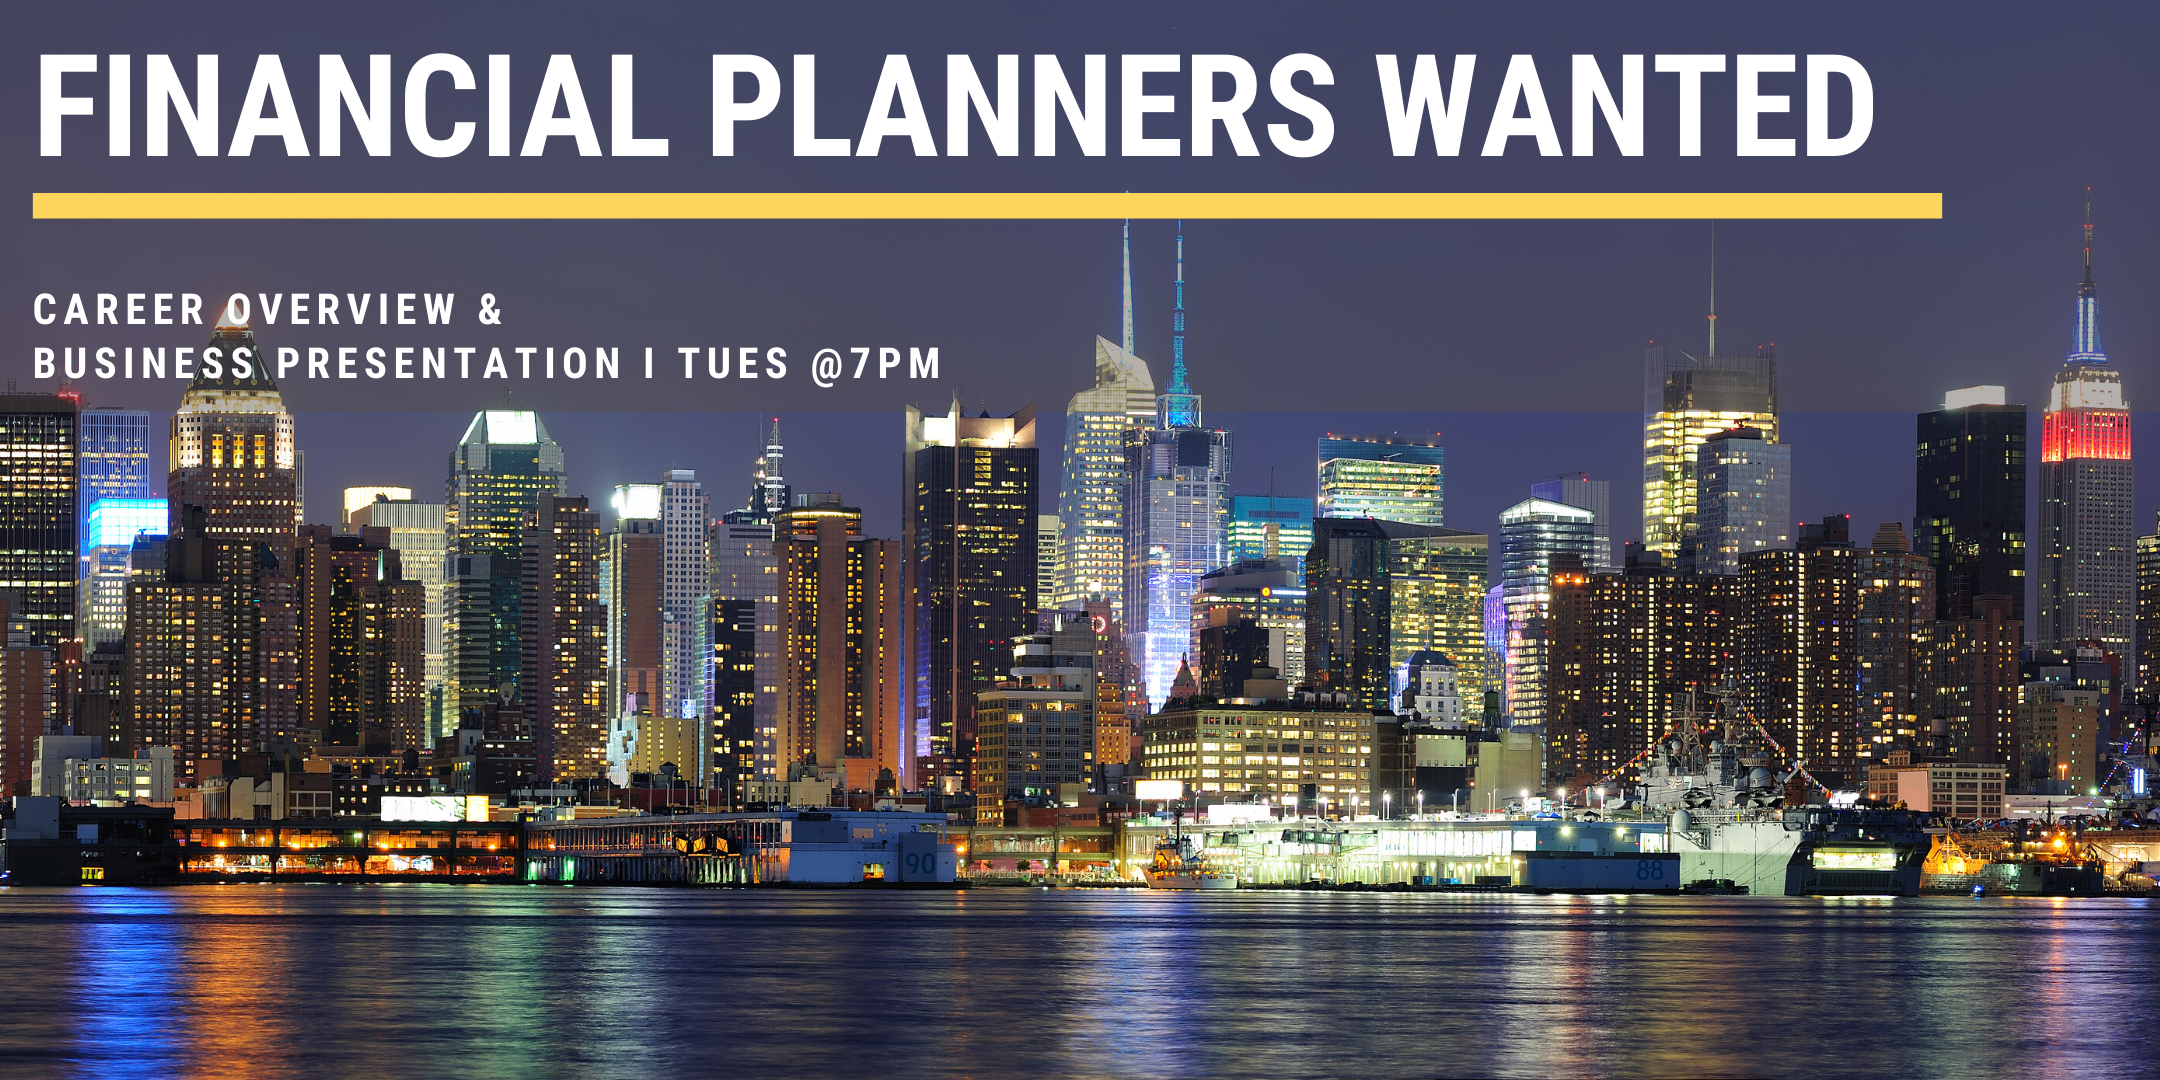 Financial Planners Wanted - Business Presentation Meeting (New York, NY)